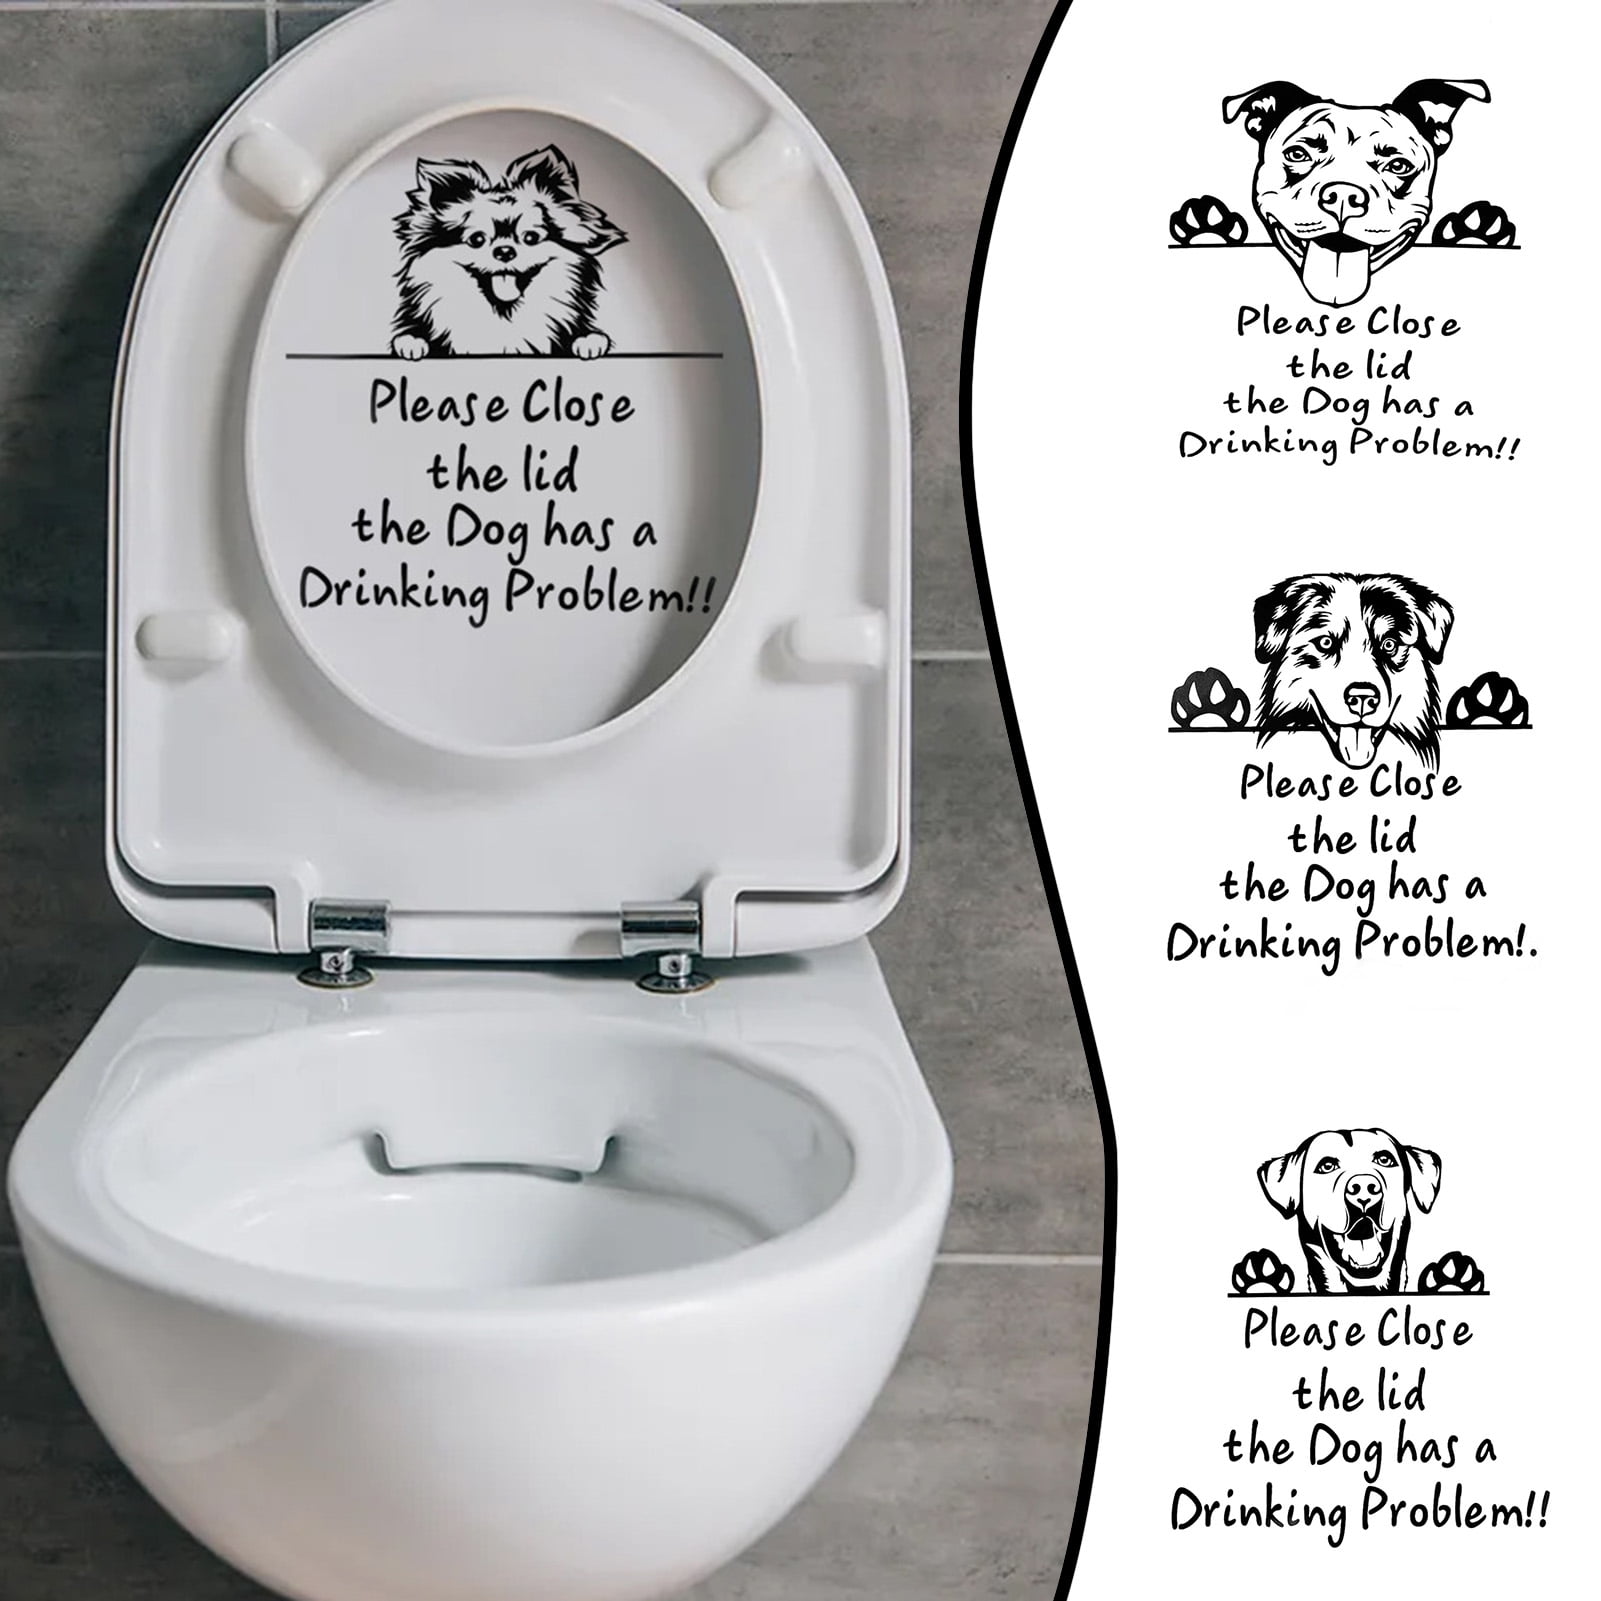 Toilet Dog Please Close The Lid Strong Adhesive Stick - Walmart.com